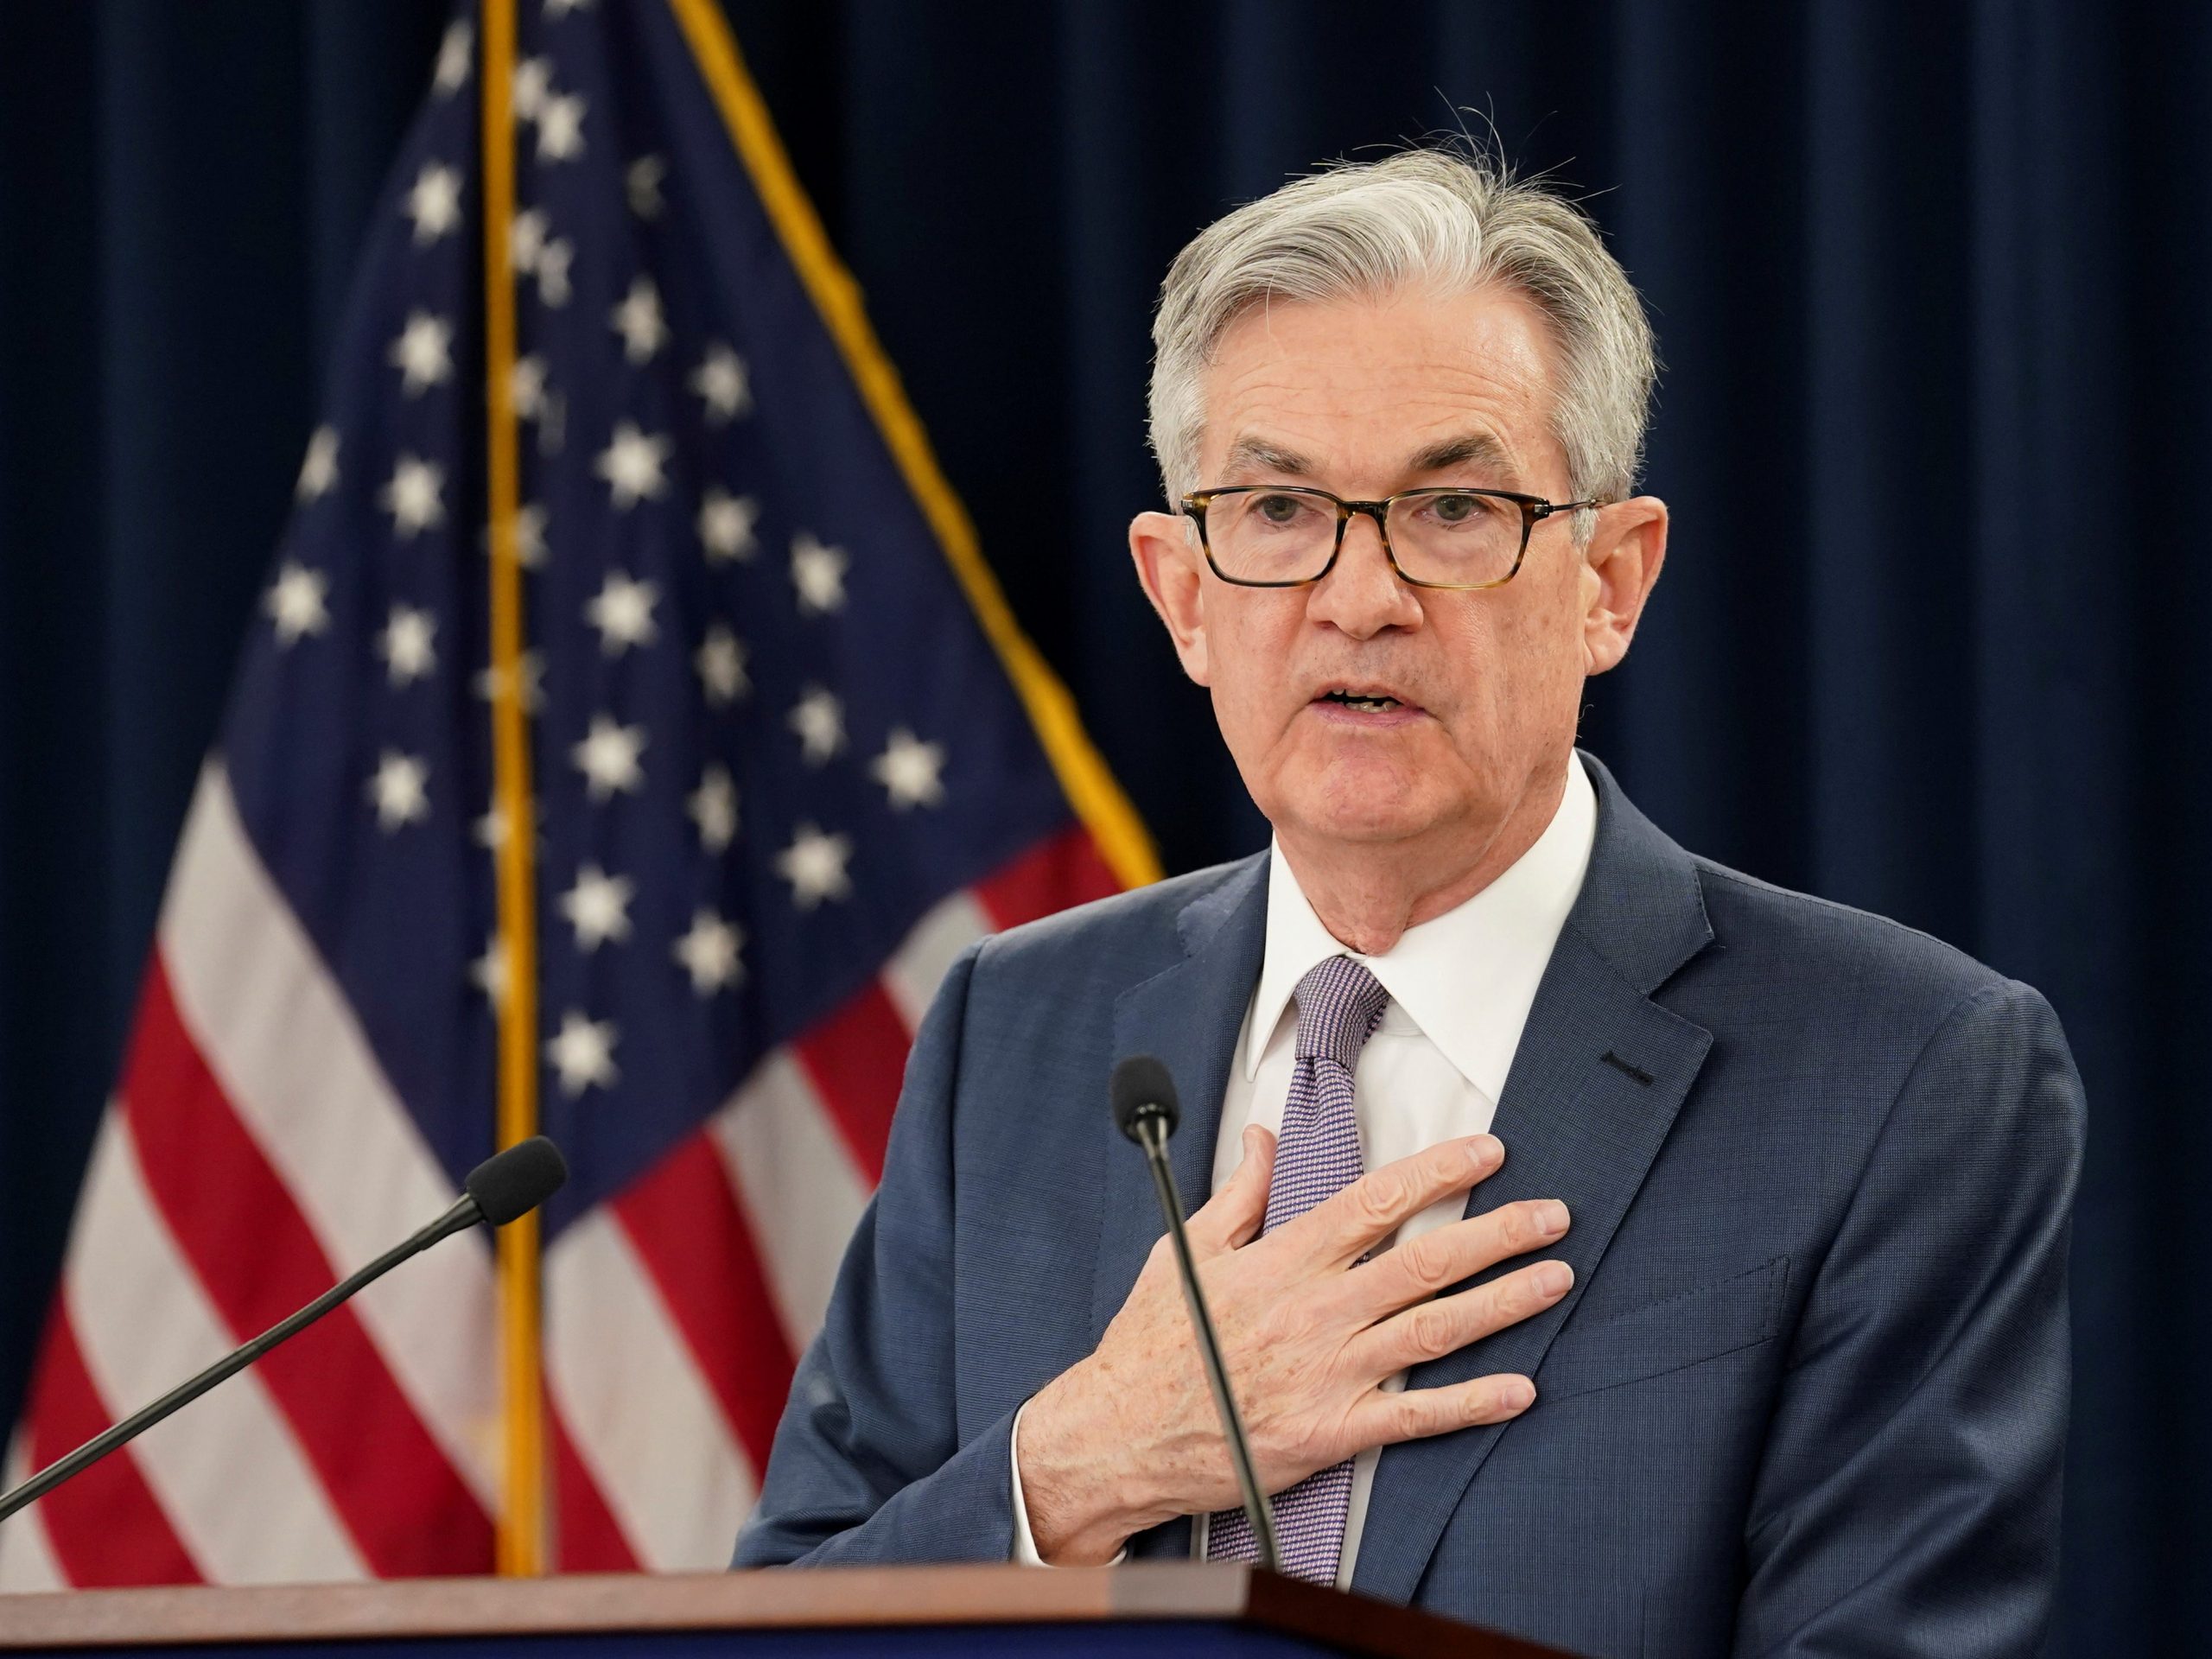 FILE PHOTO: U.S. Federal Reserve Chairman Jerome Powell speaks to reporters after the Federal Reserve cut interest rates in an emergency move designed to shield the world's largest economy from the impact of the coronavirus, during a news conference in Washington, U.S., March 3, 2020. REUTERS/Kevin Lamarque 